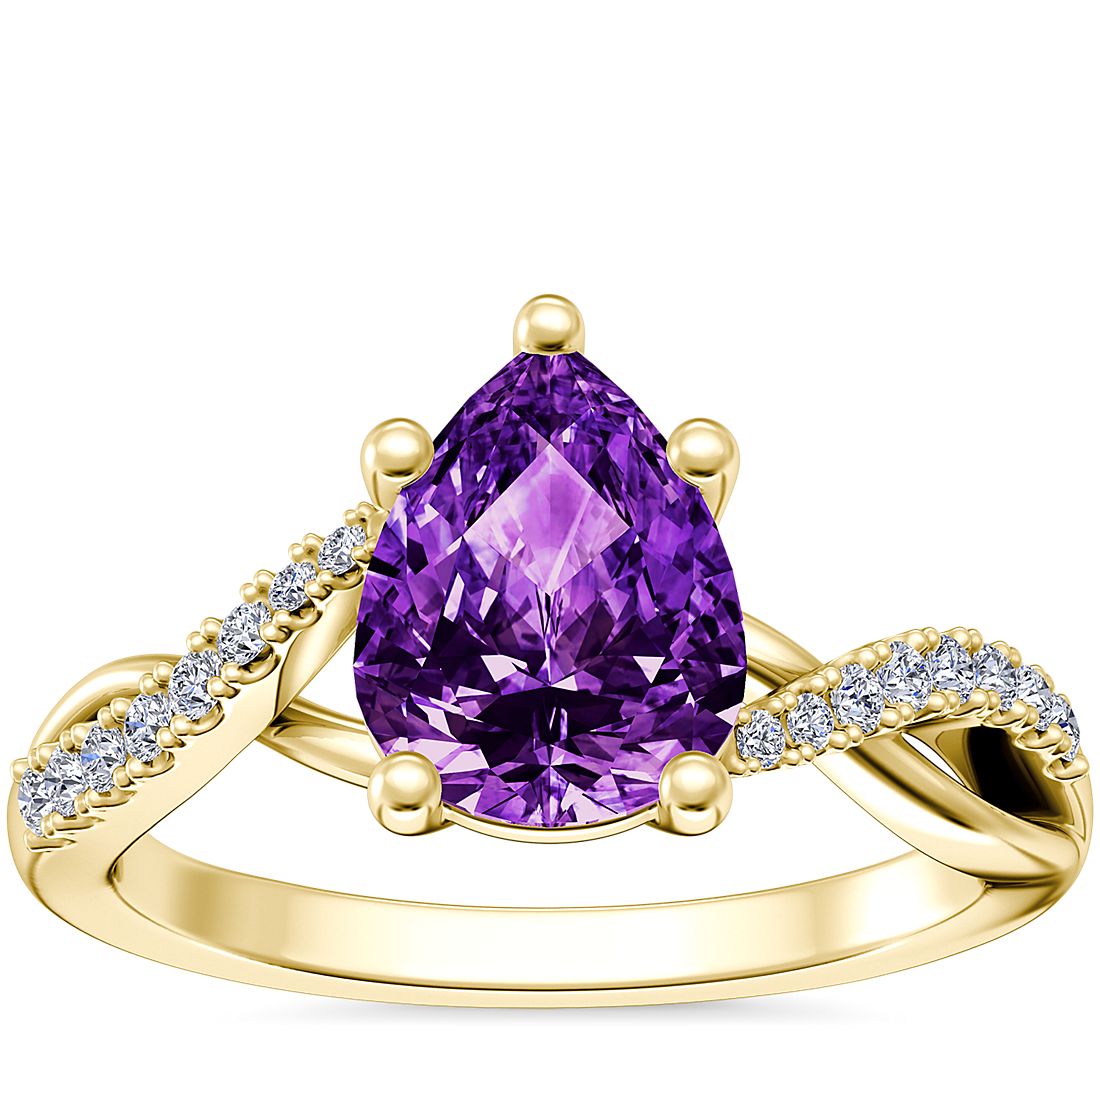 Classic Petite Twist Diamond Engagement Ring with Pear-Shaped Amethyst in 14k Yellow Gold (8x6mm)